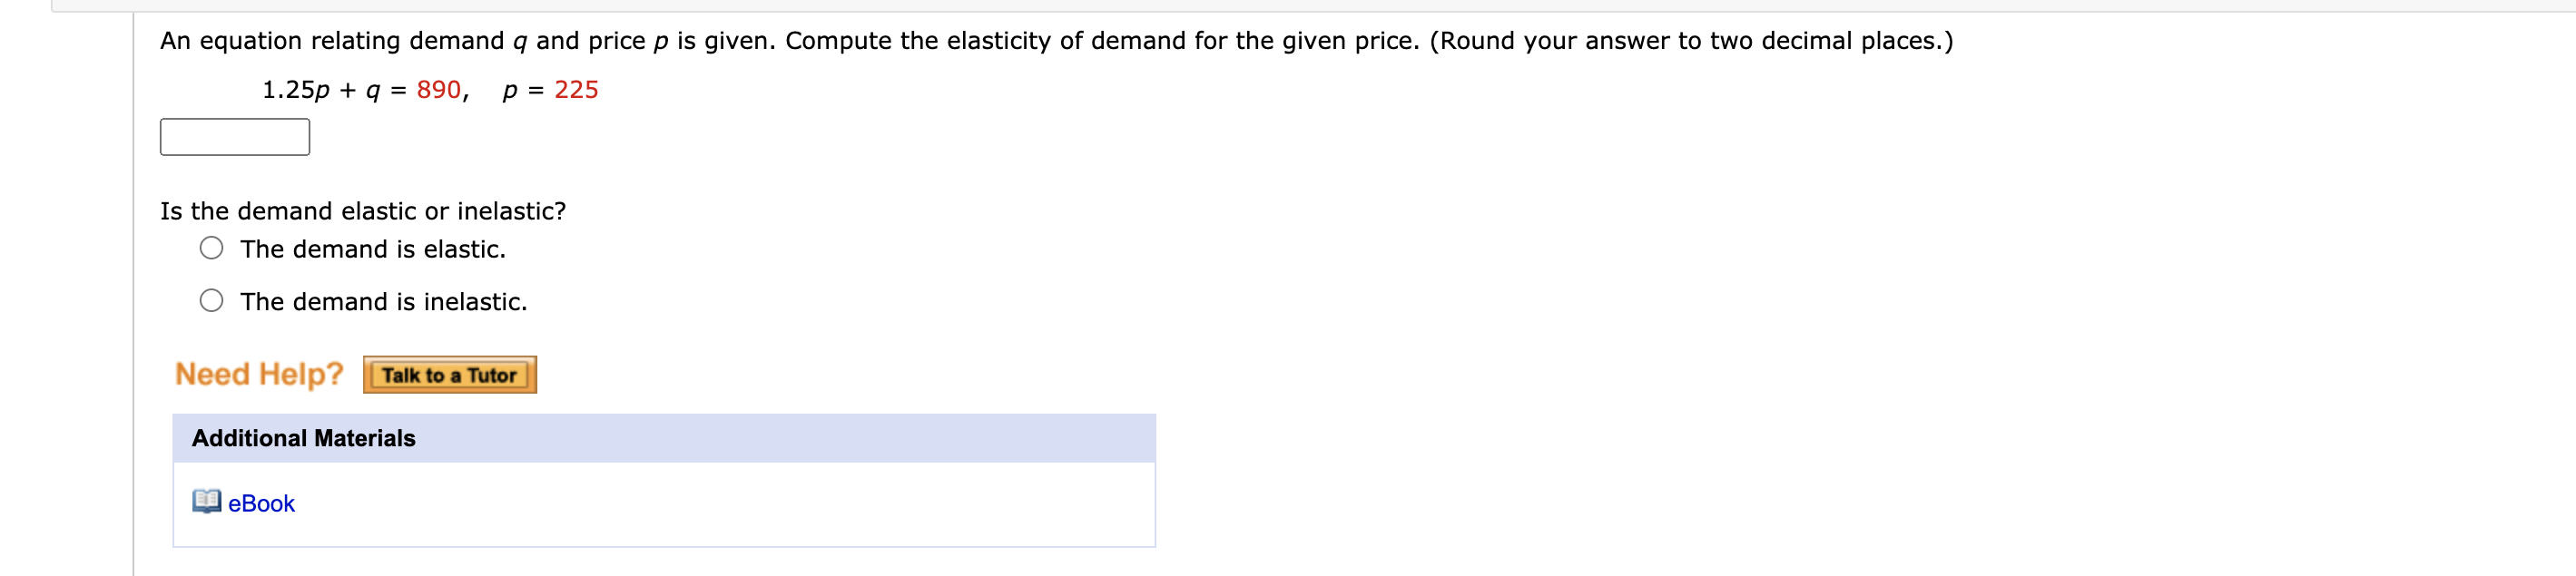 An equation relating demand q and price p is given. Compute the elasticity of demand for the given price. (Round your answer to two decimal places.)
1.25p + q = 890,
p = 225
Is the demand elastic or inelastic?
The demand is elastic.
The demand is inelastic.
